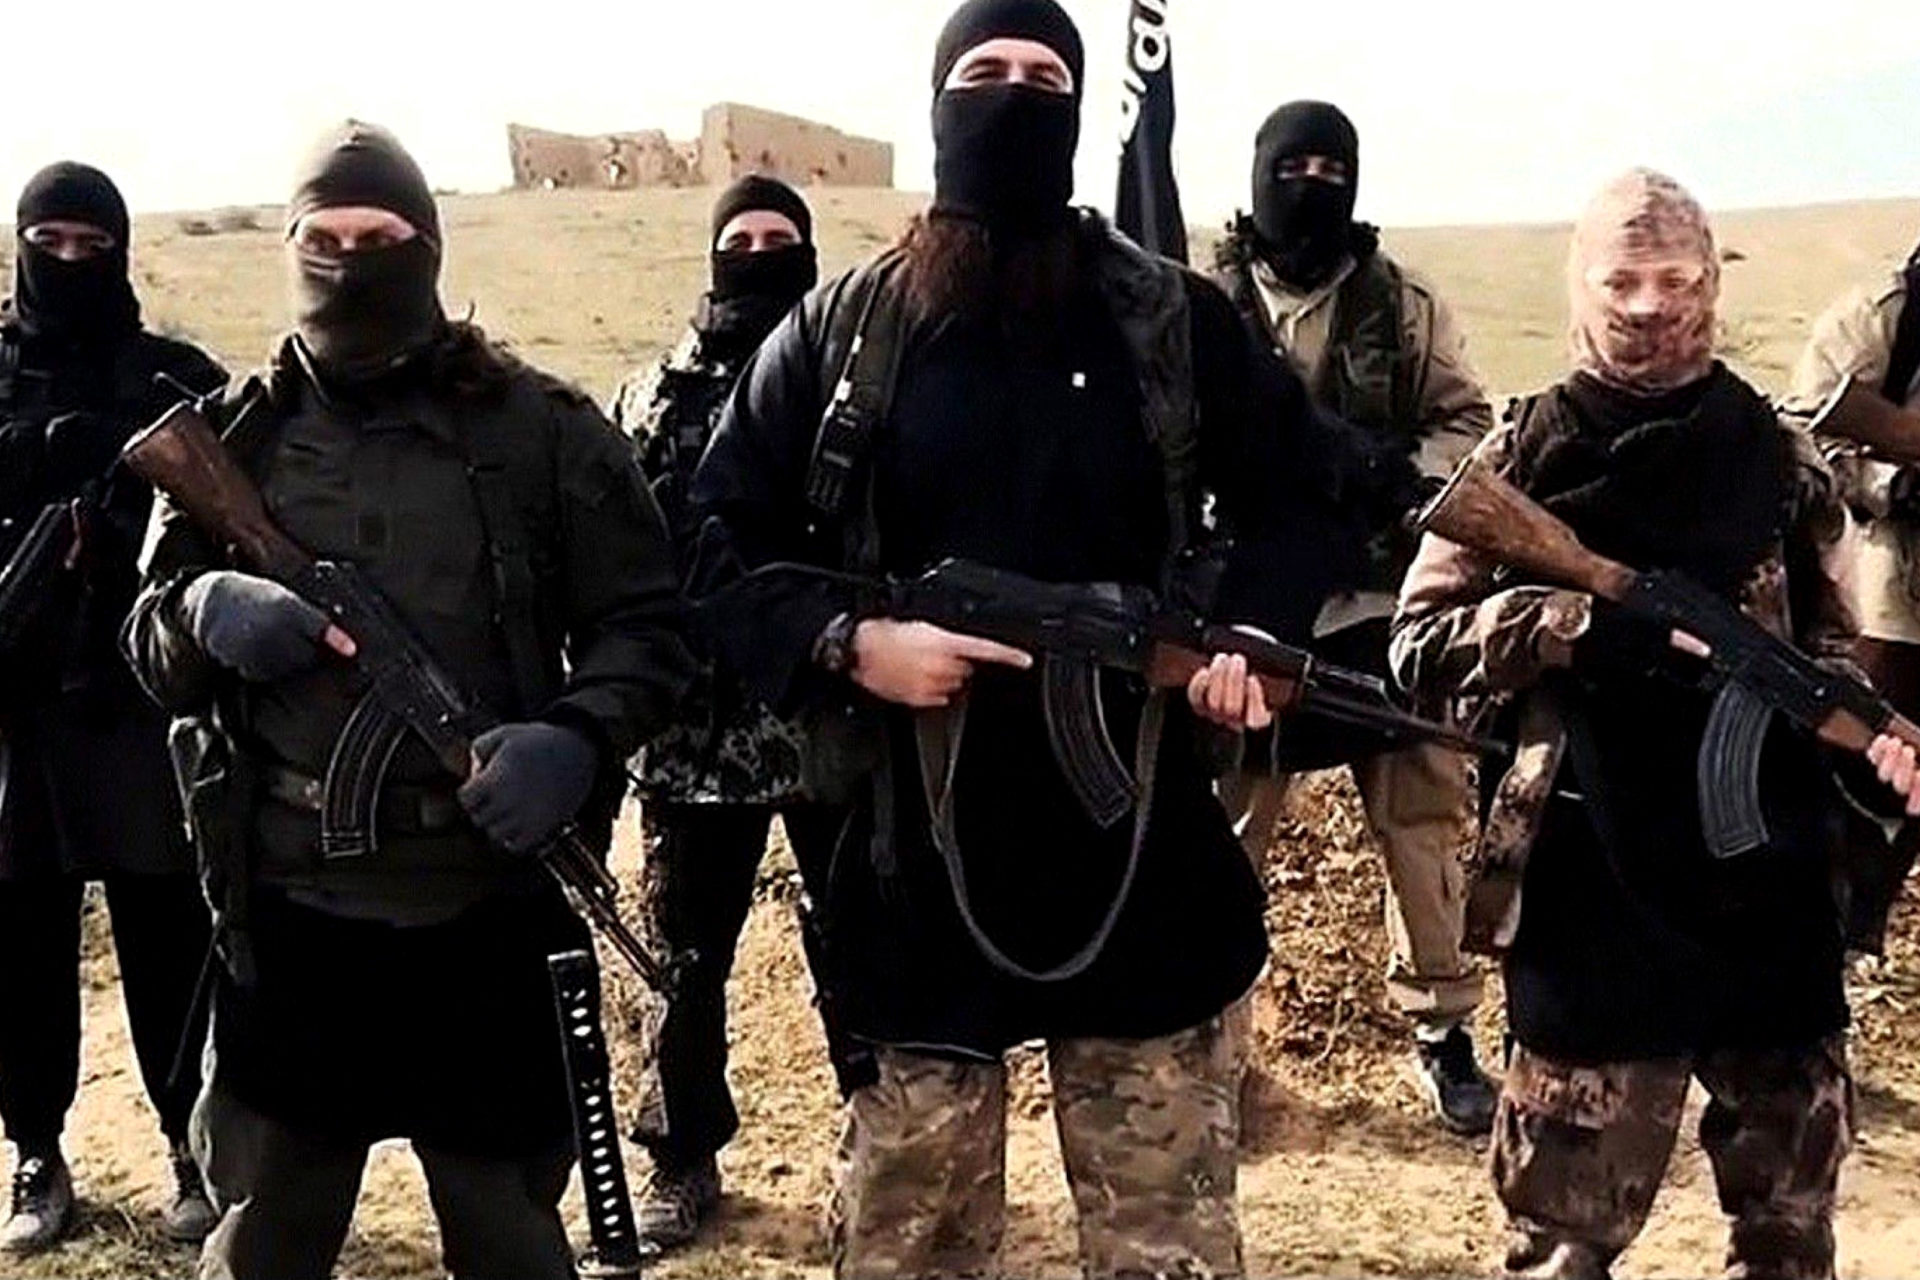 New ISIS “Kill List” Emerges – Want to Target Several US Cities